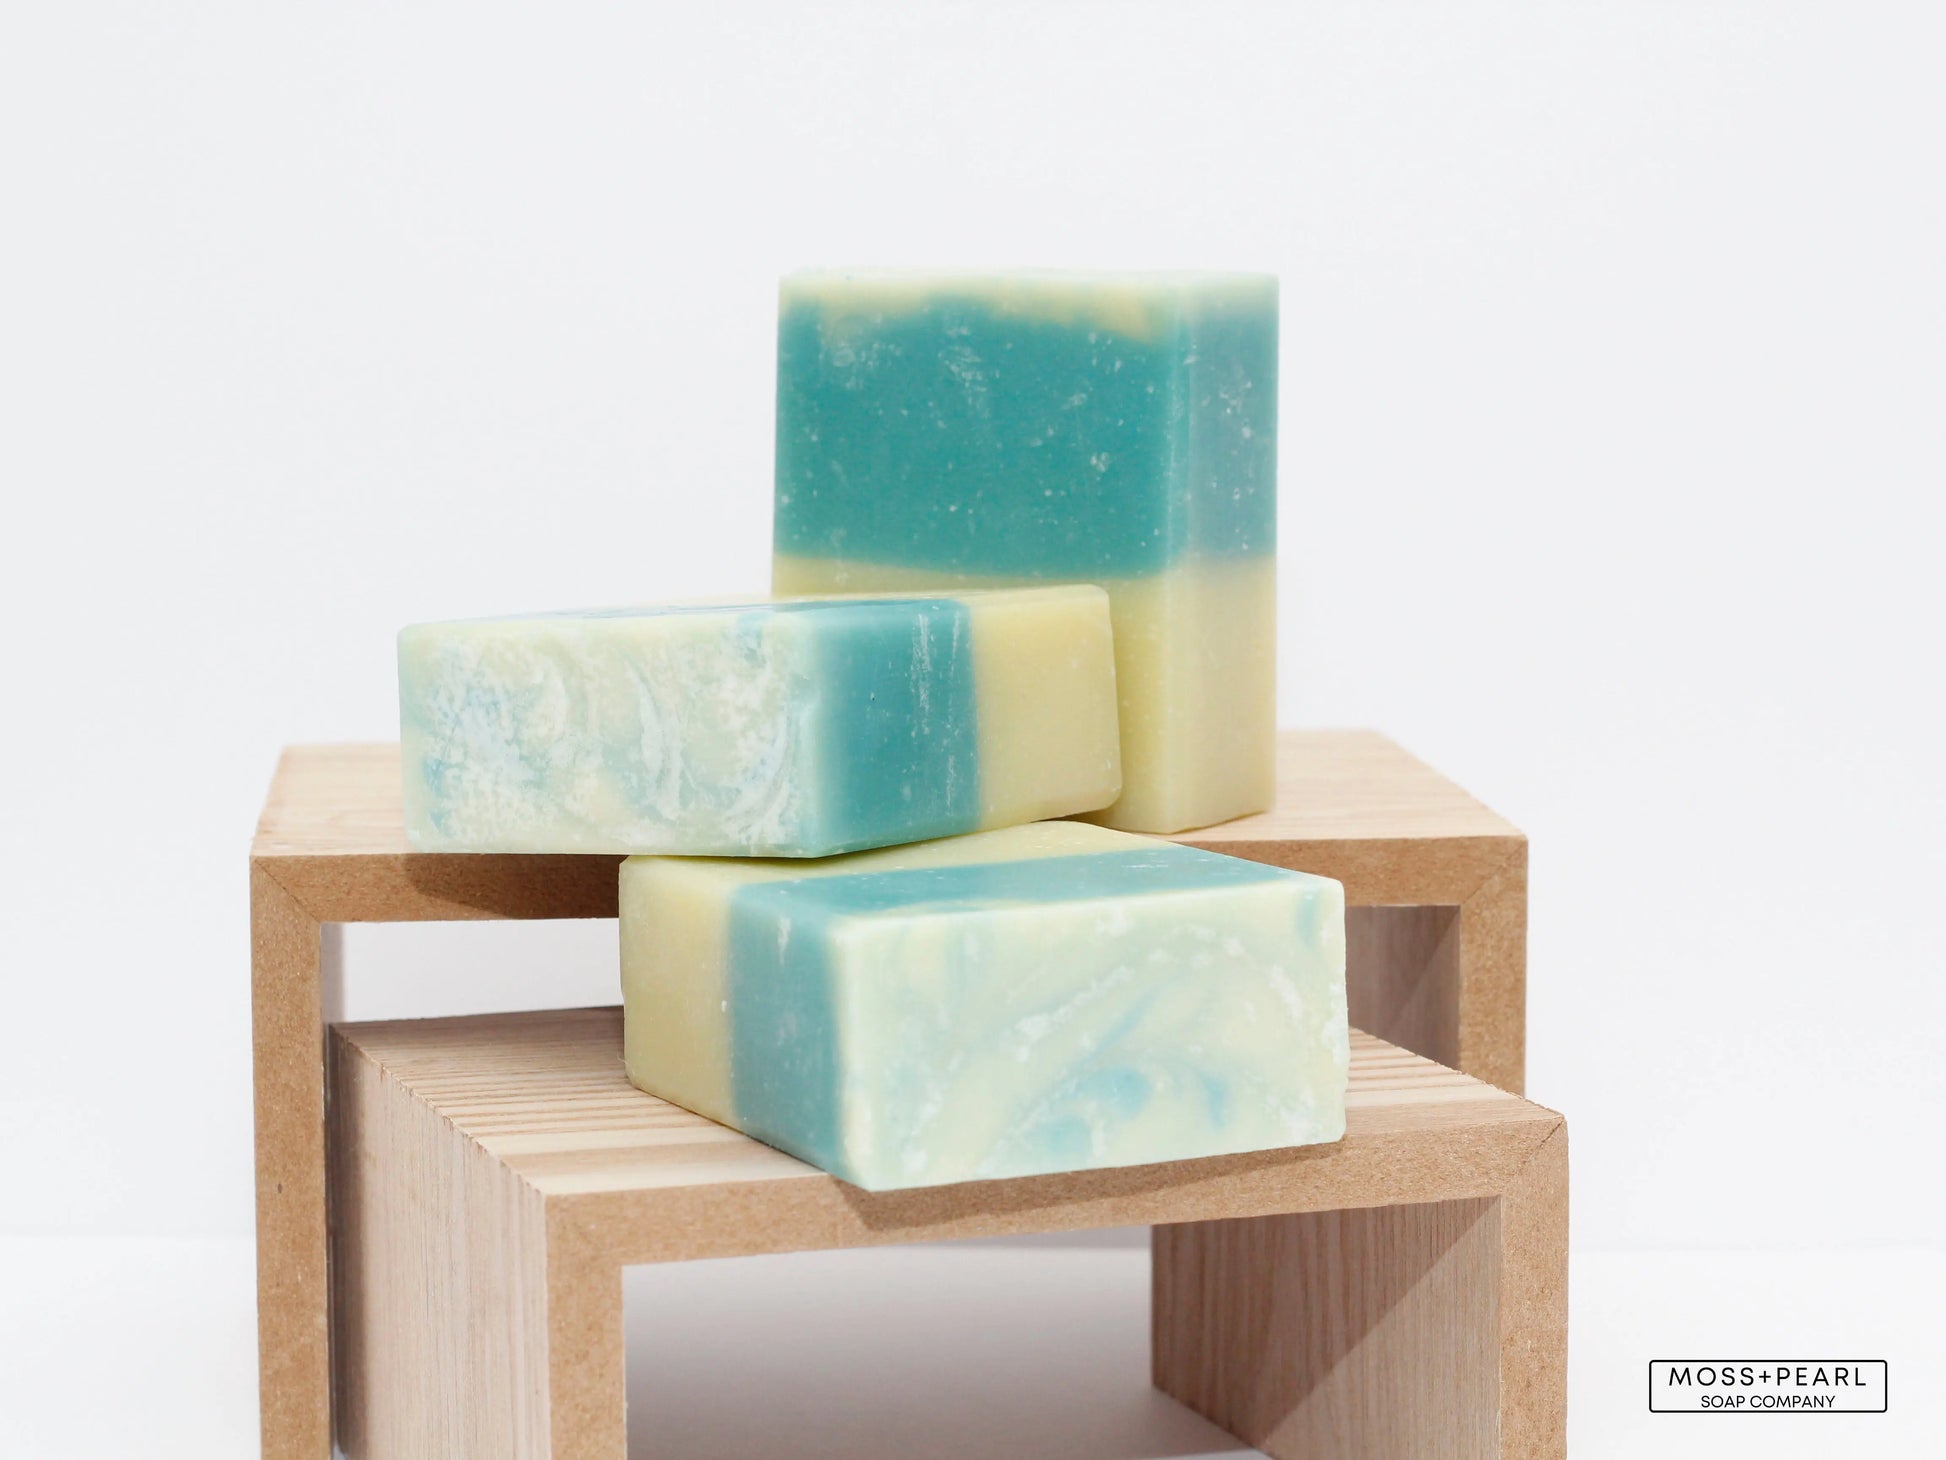 GINGER LIME FACE BAR Moss + Pearl Soap Company